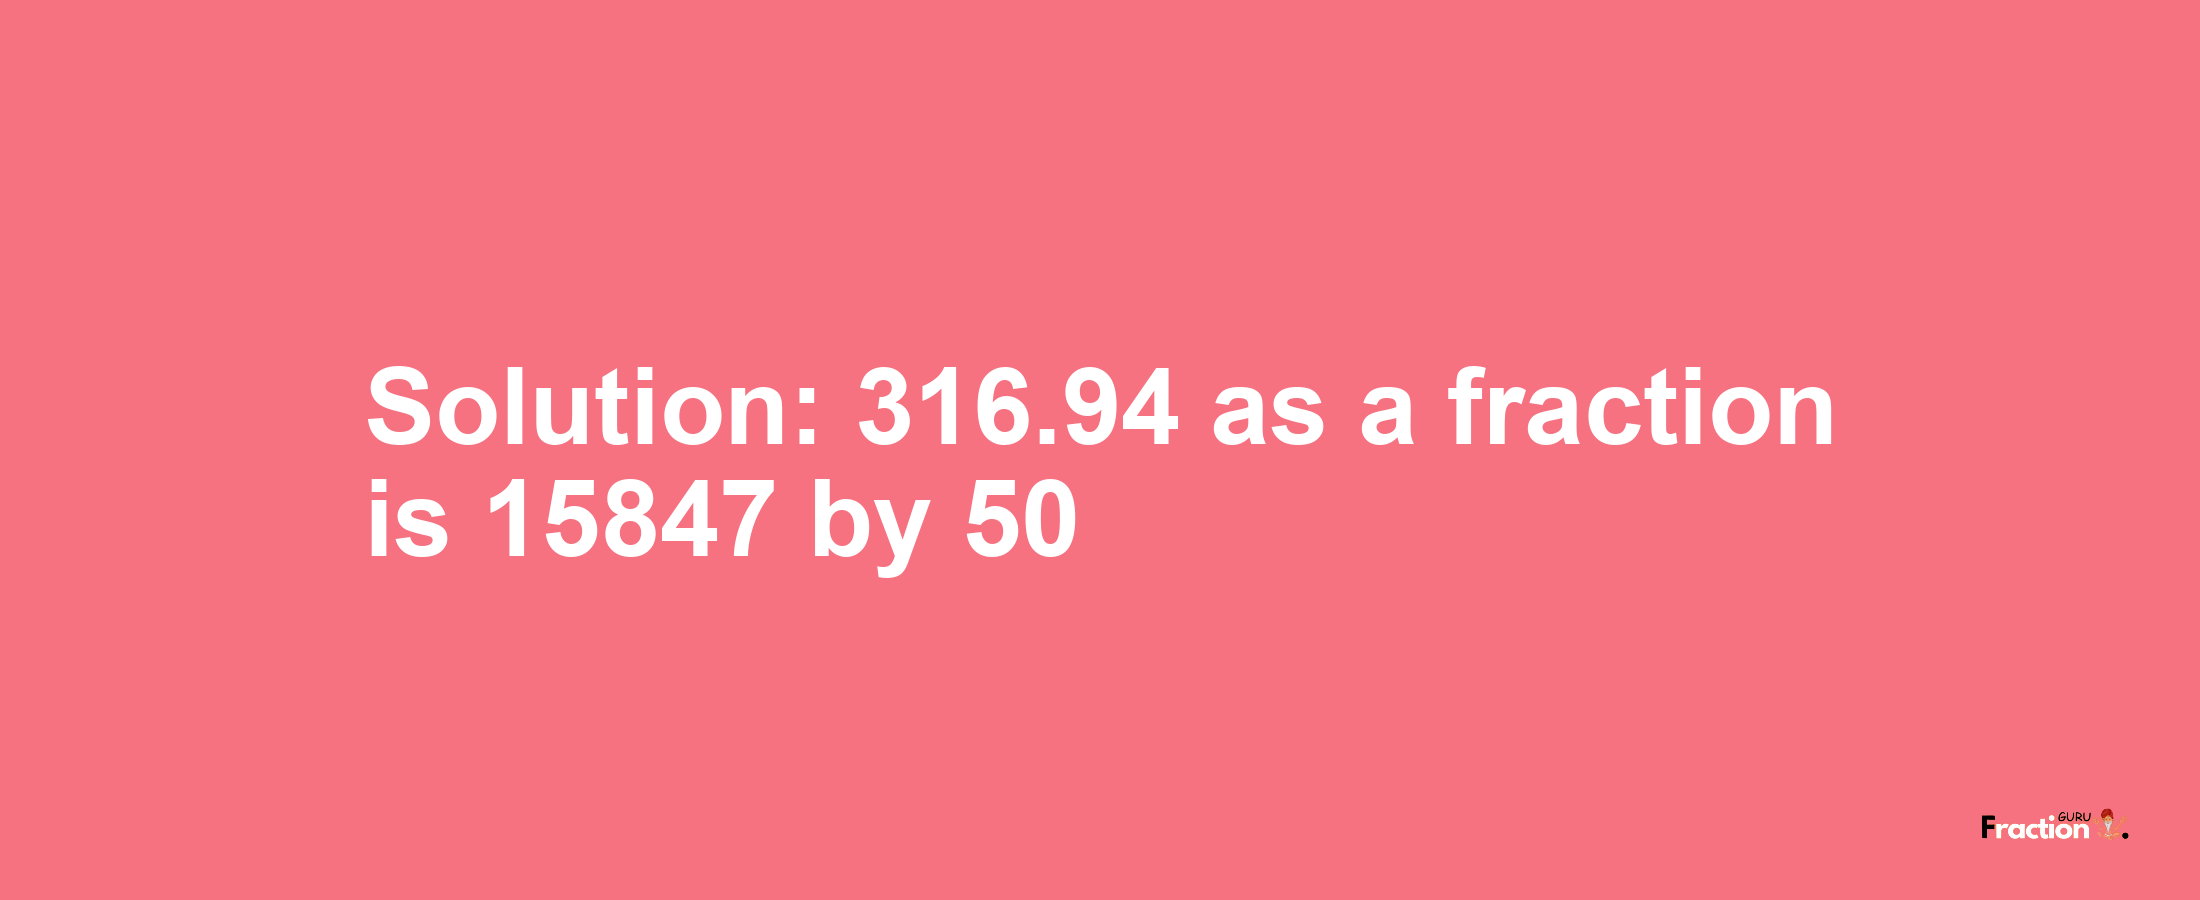 Solution:316.94 as a fraction is 15847/50